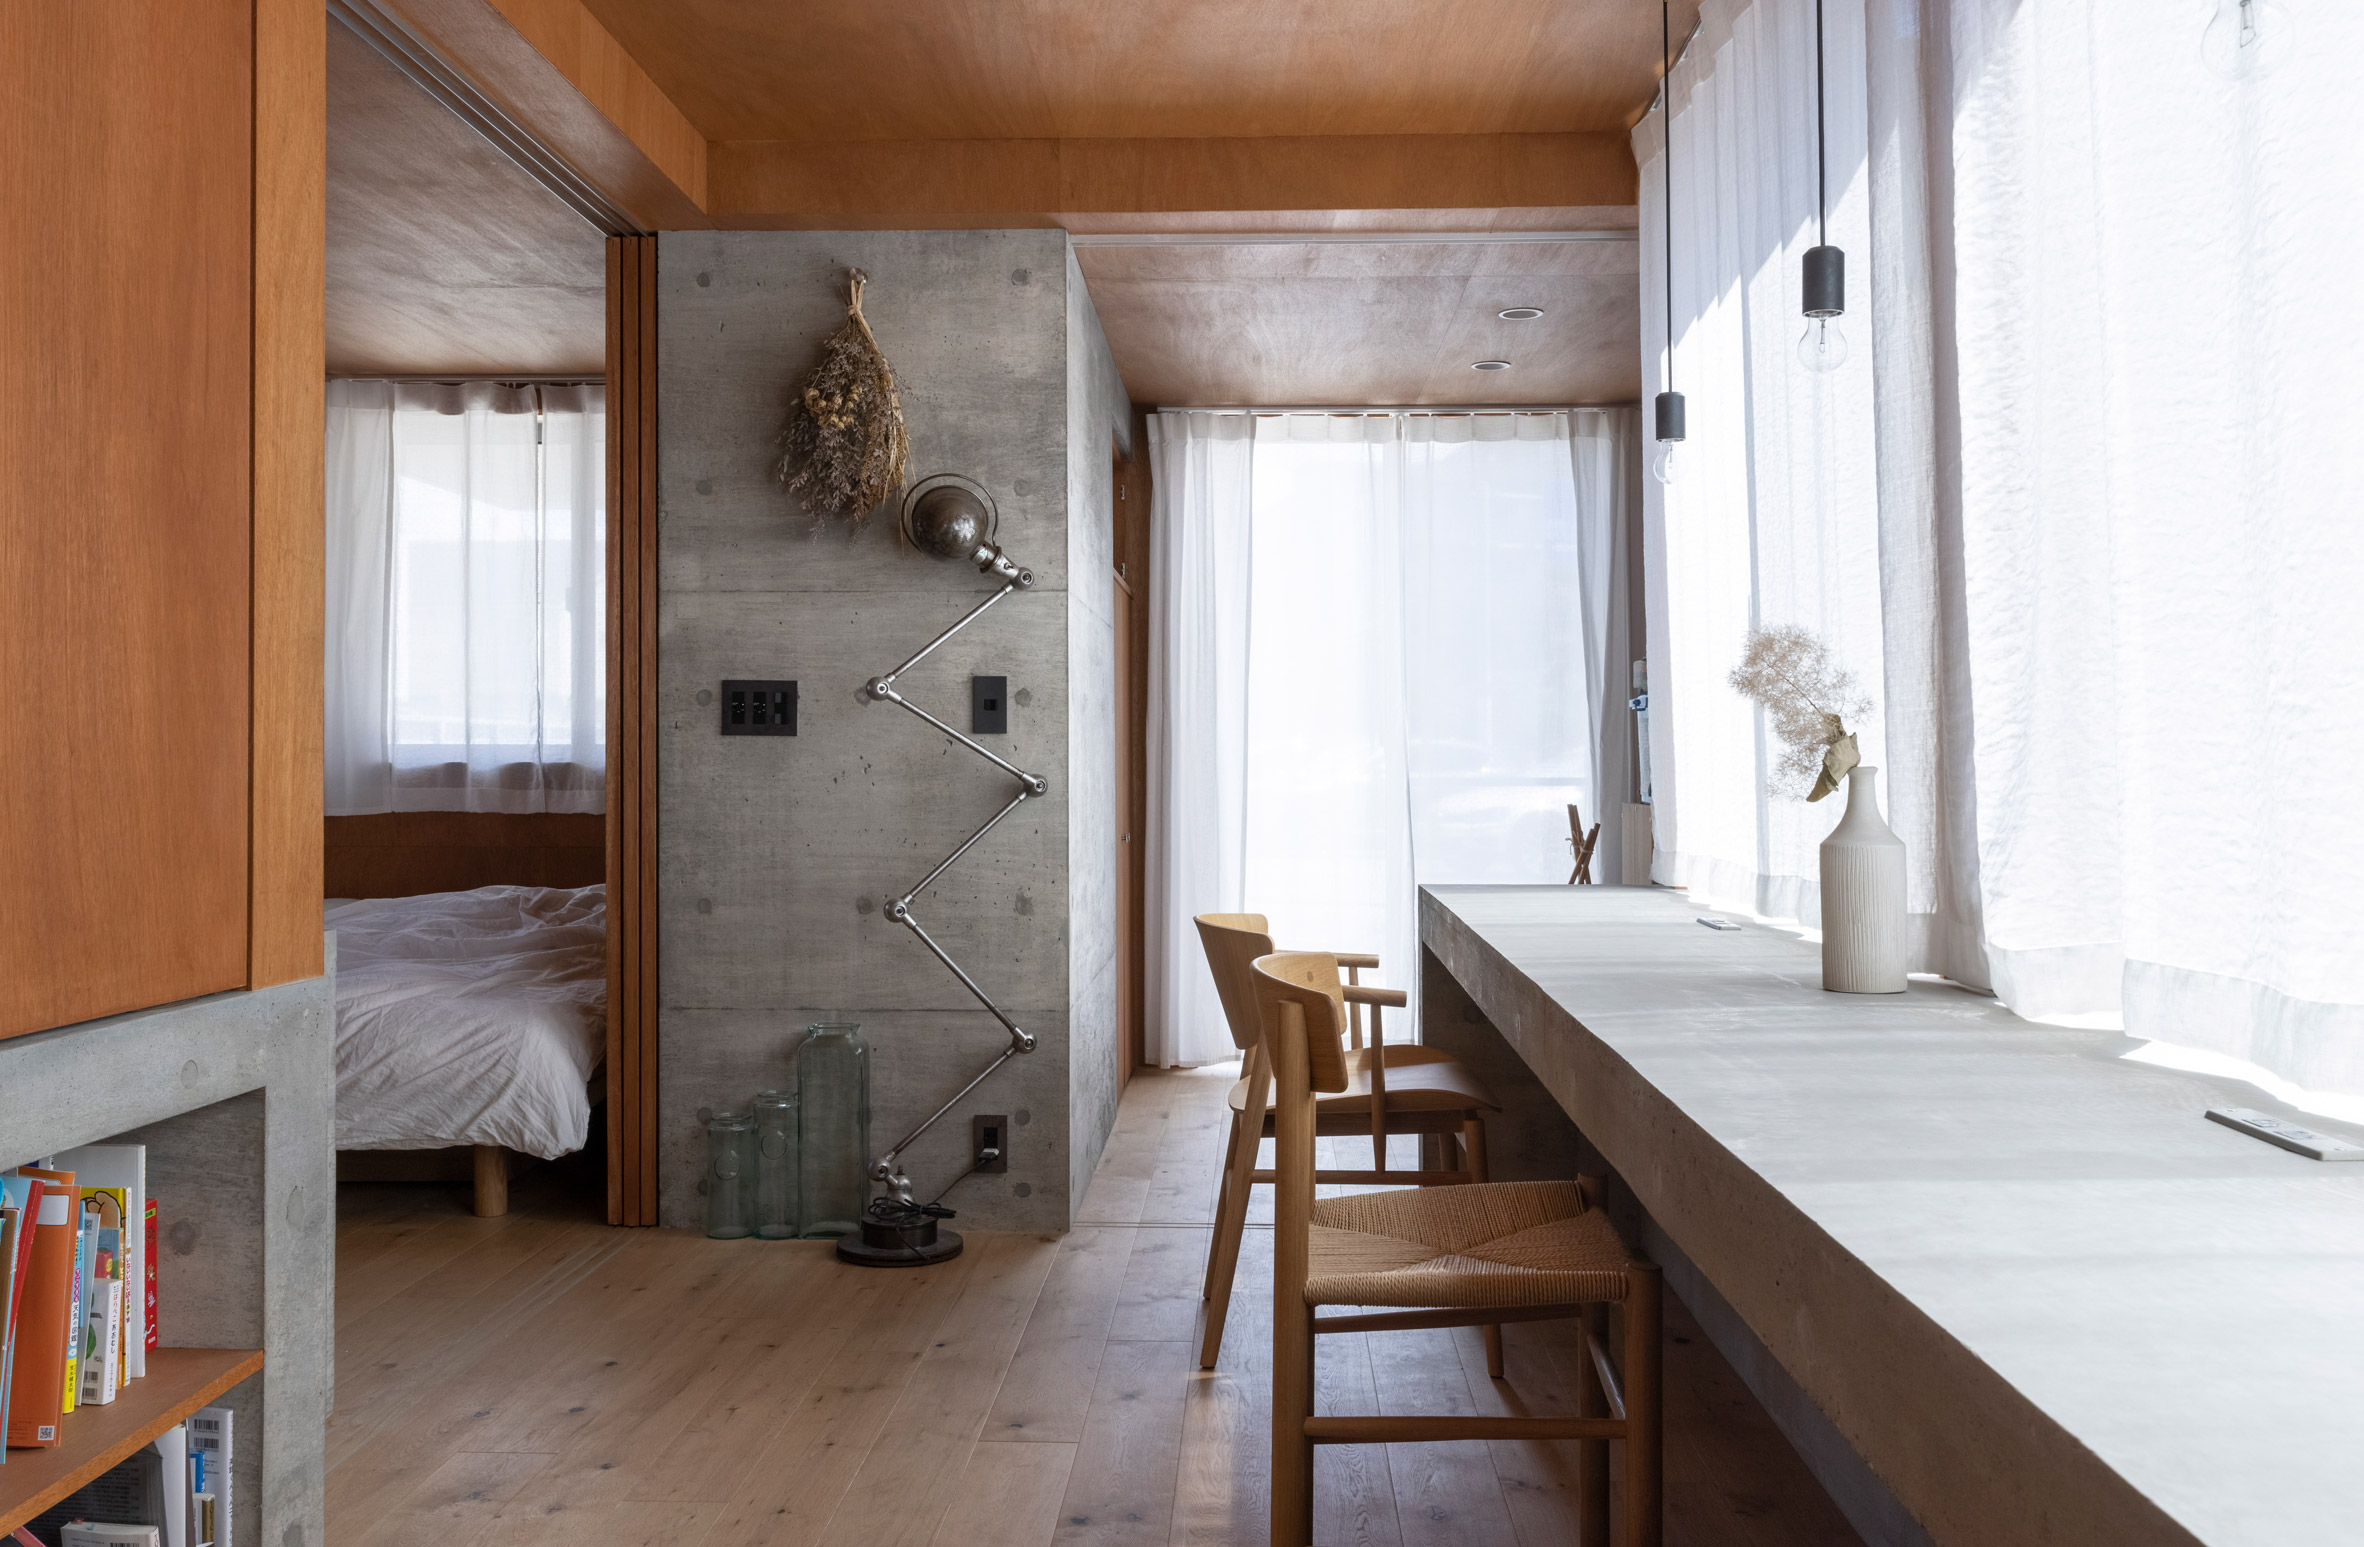 Japanese bedroom with exposed concrete walls and furniture